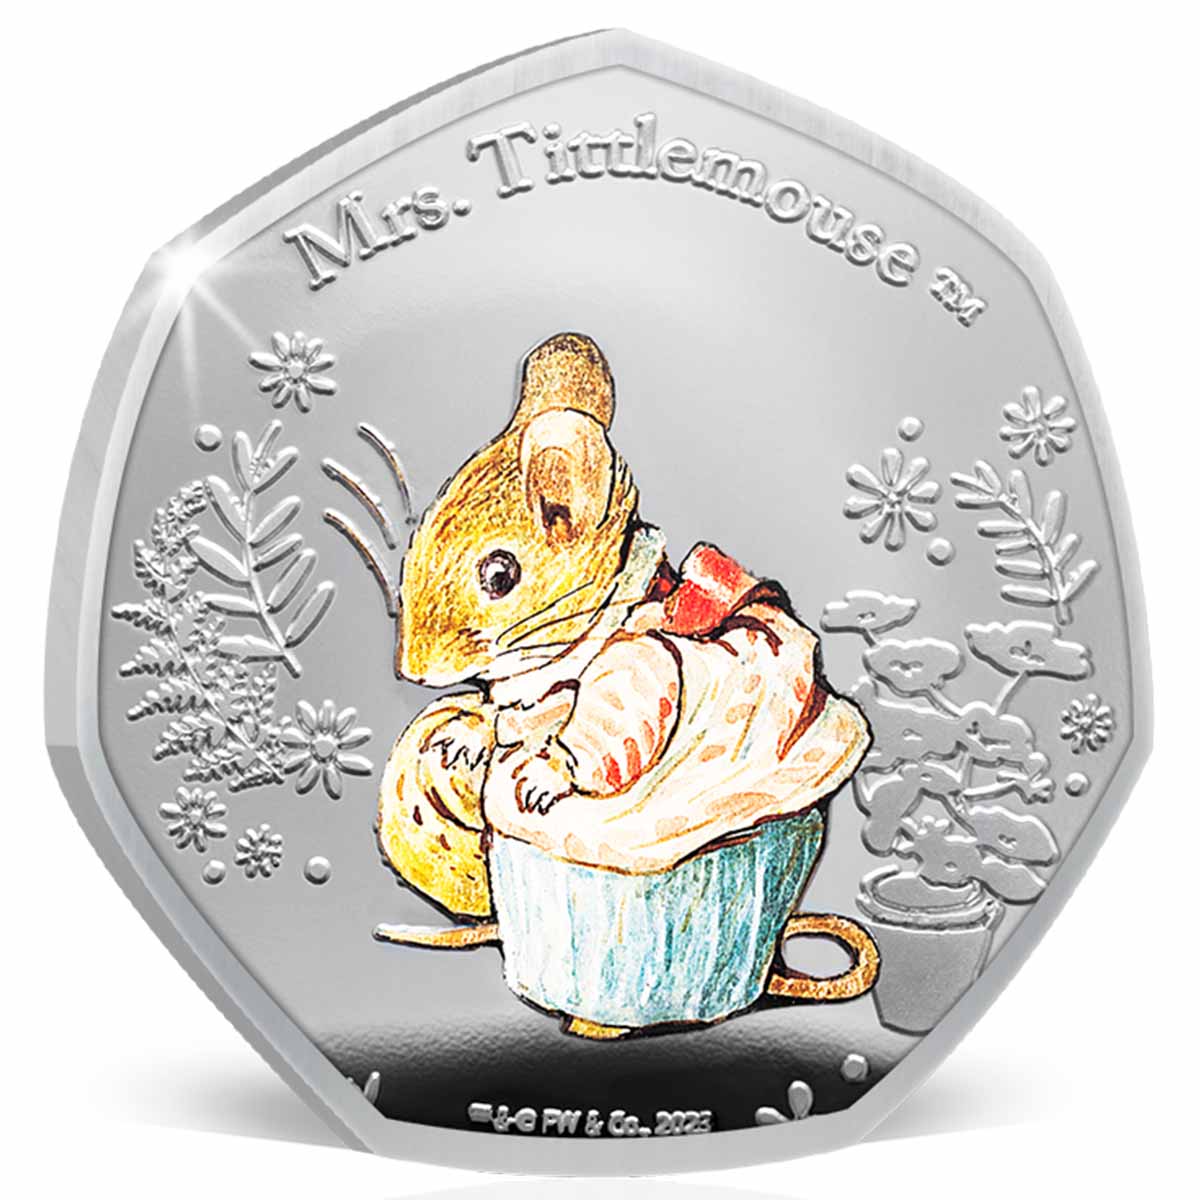 Peter Rabbit™ Complete Commemorative Coin Collection